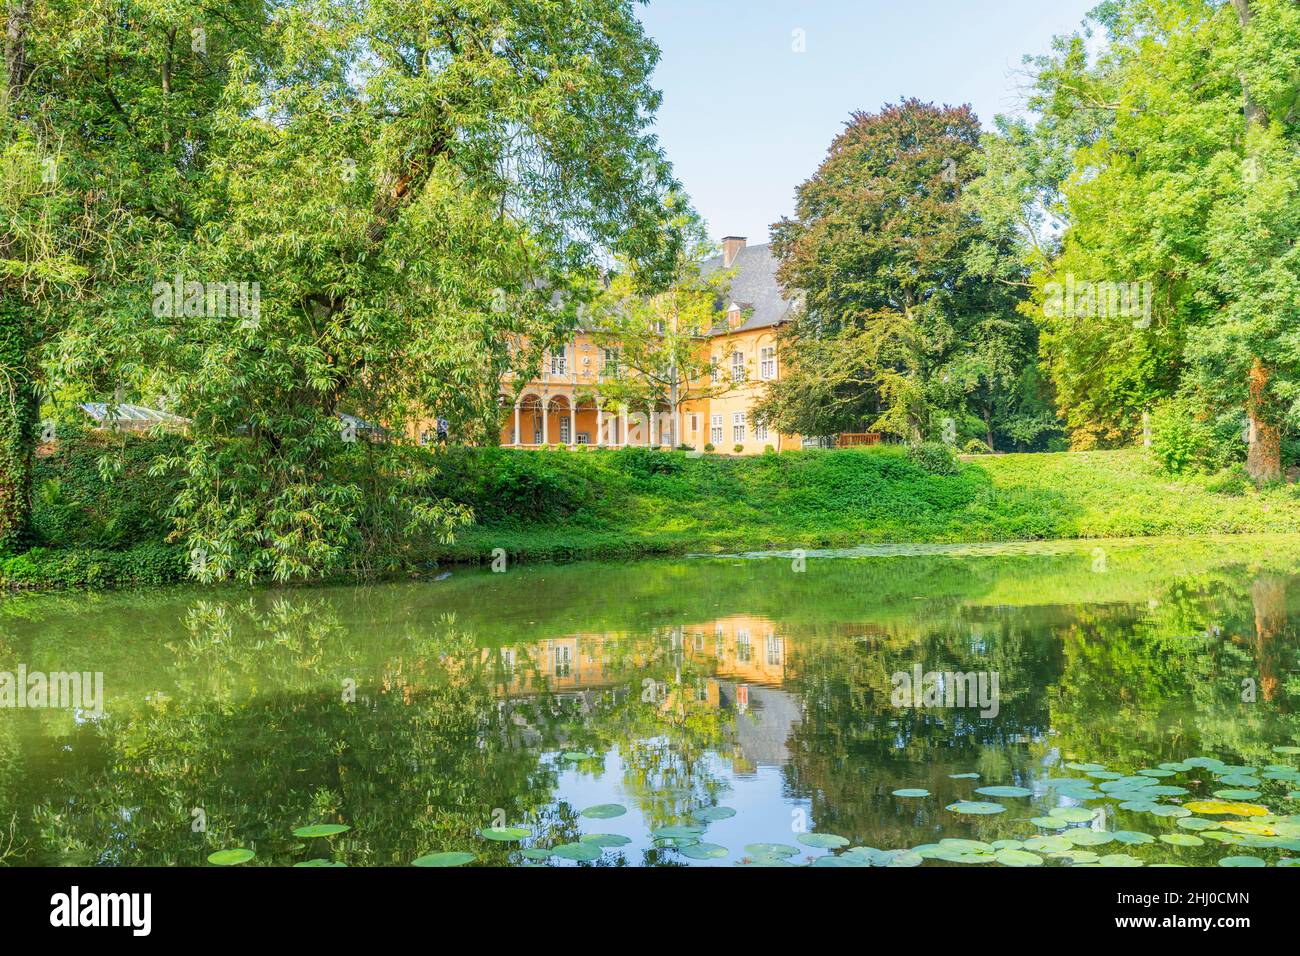 Castle Rheydt - View from Moat to Manor House , Germany, Moenchengladbach 01.09.2017 Stock Photo